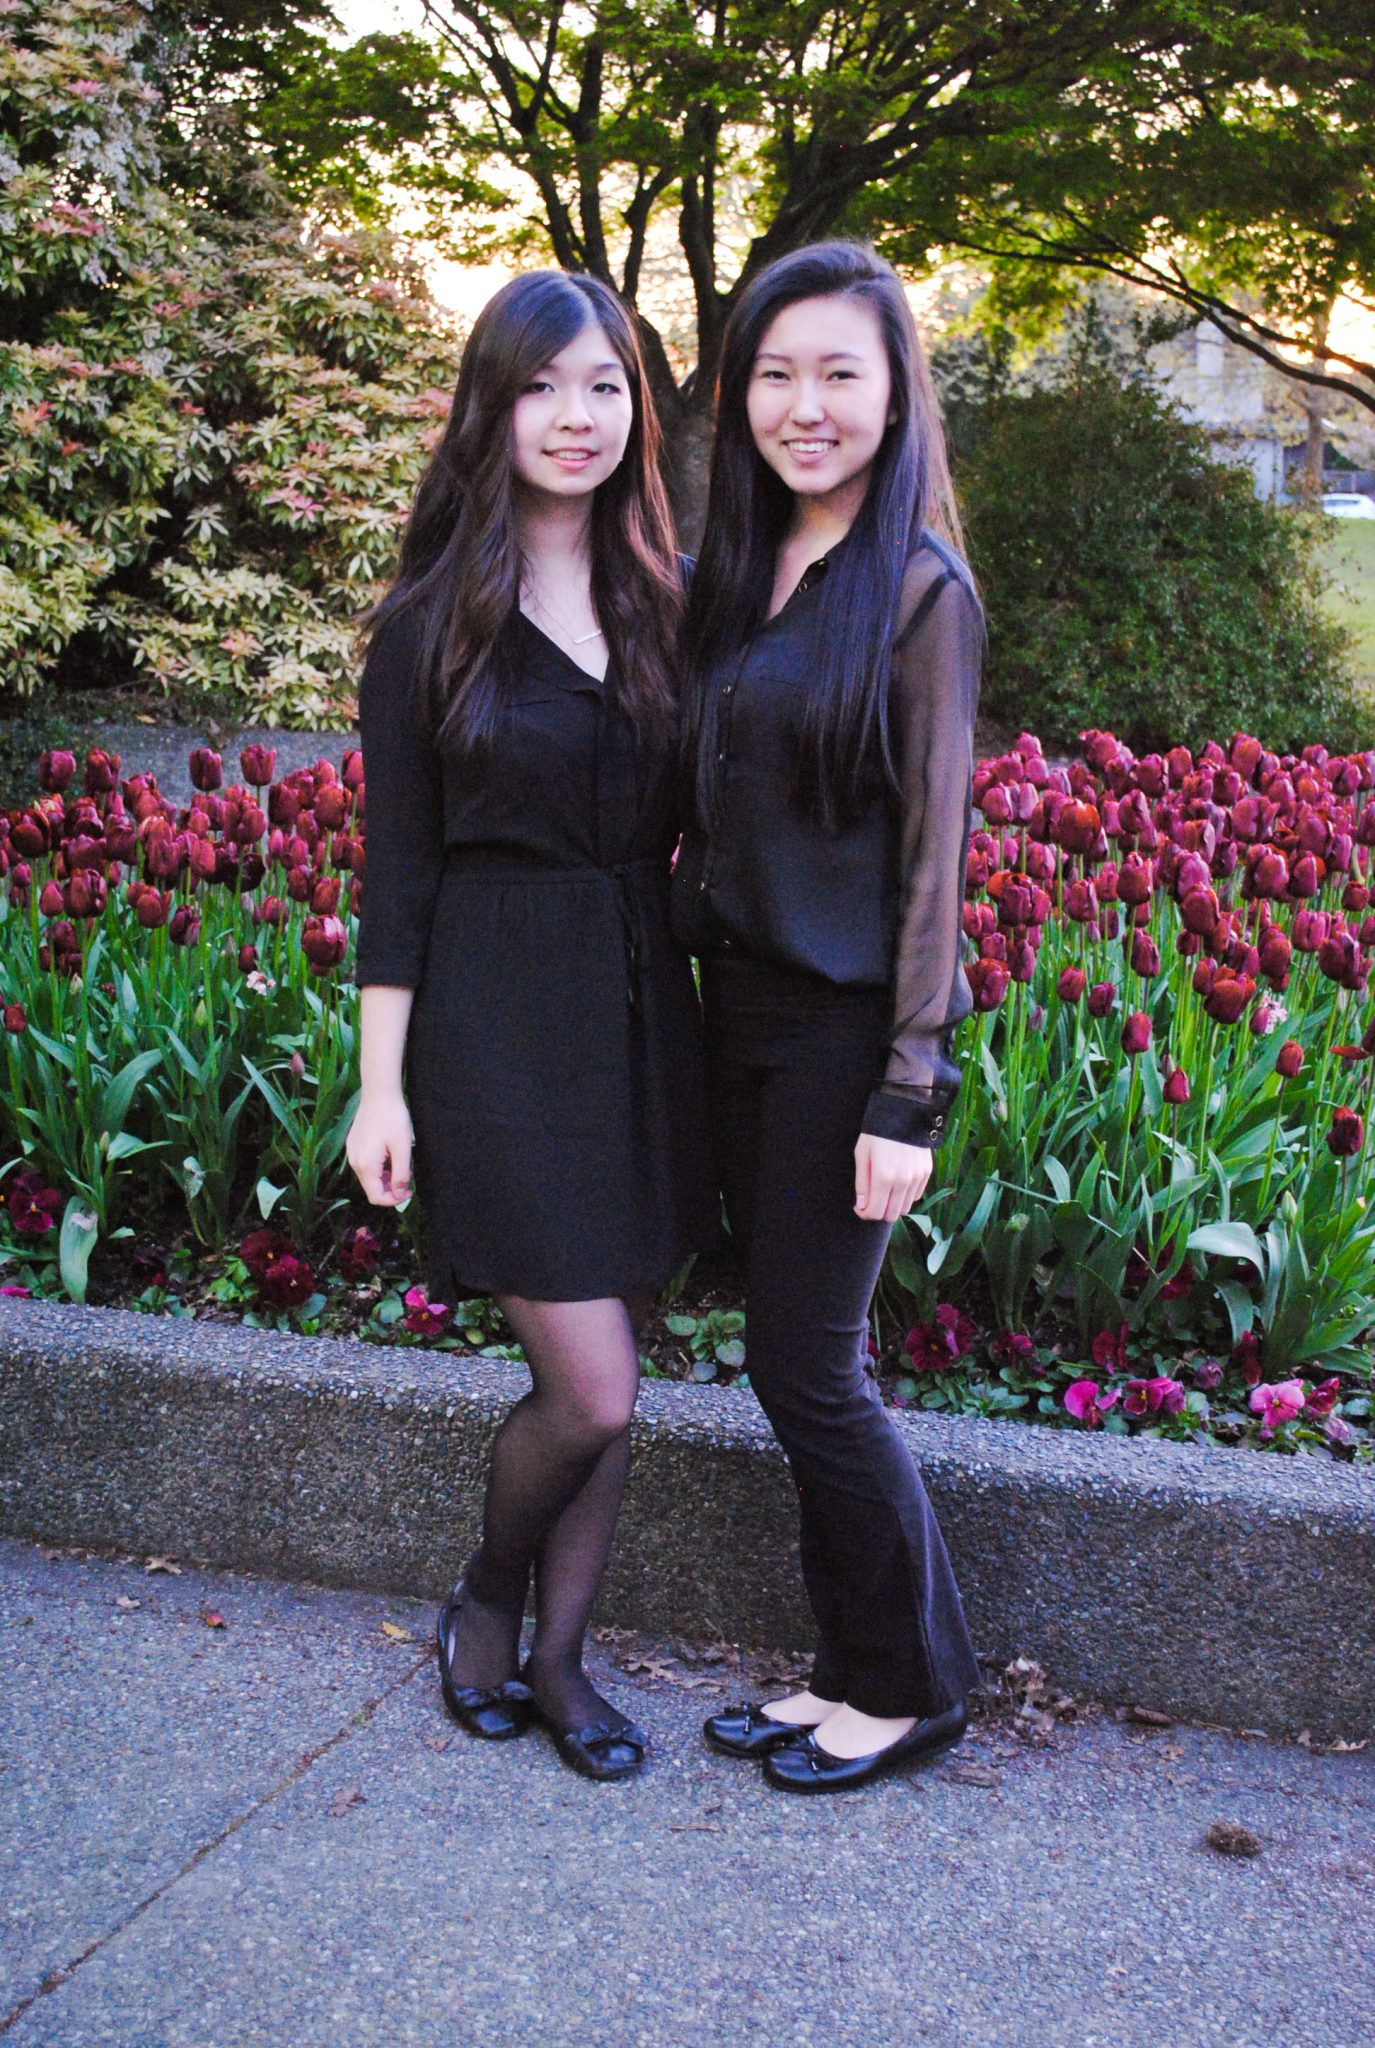 61st Annual Young Musicians Competition Koerner Hall Vancouver Academy of Music 2015 chamber music